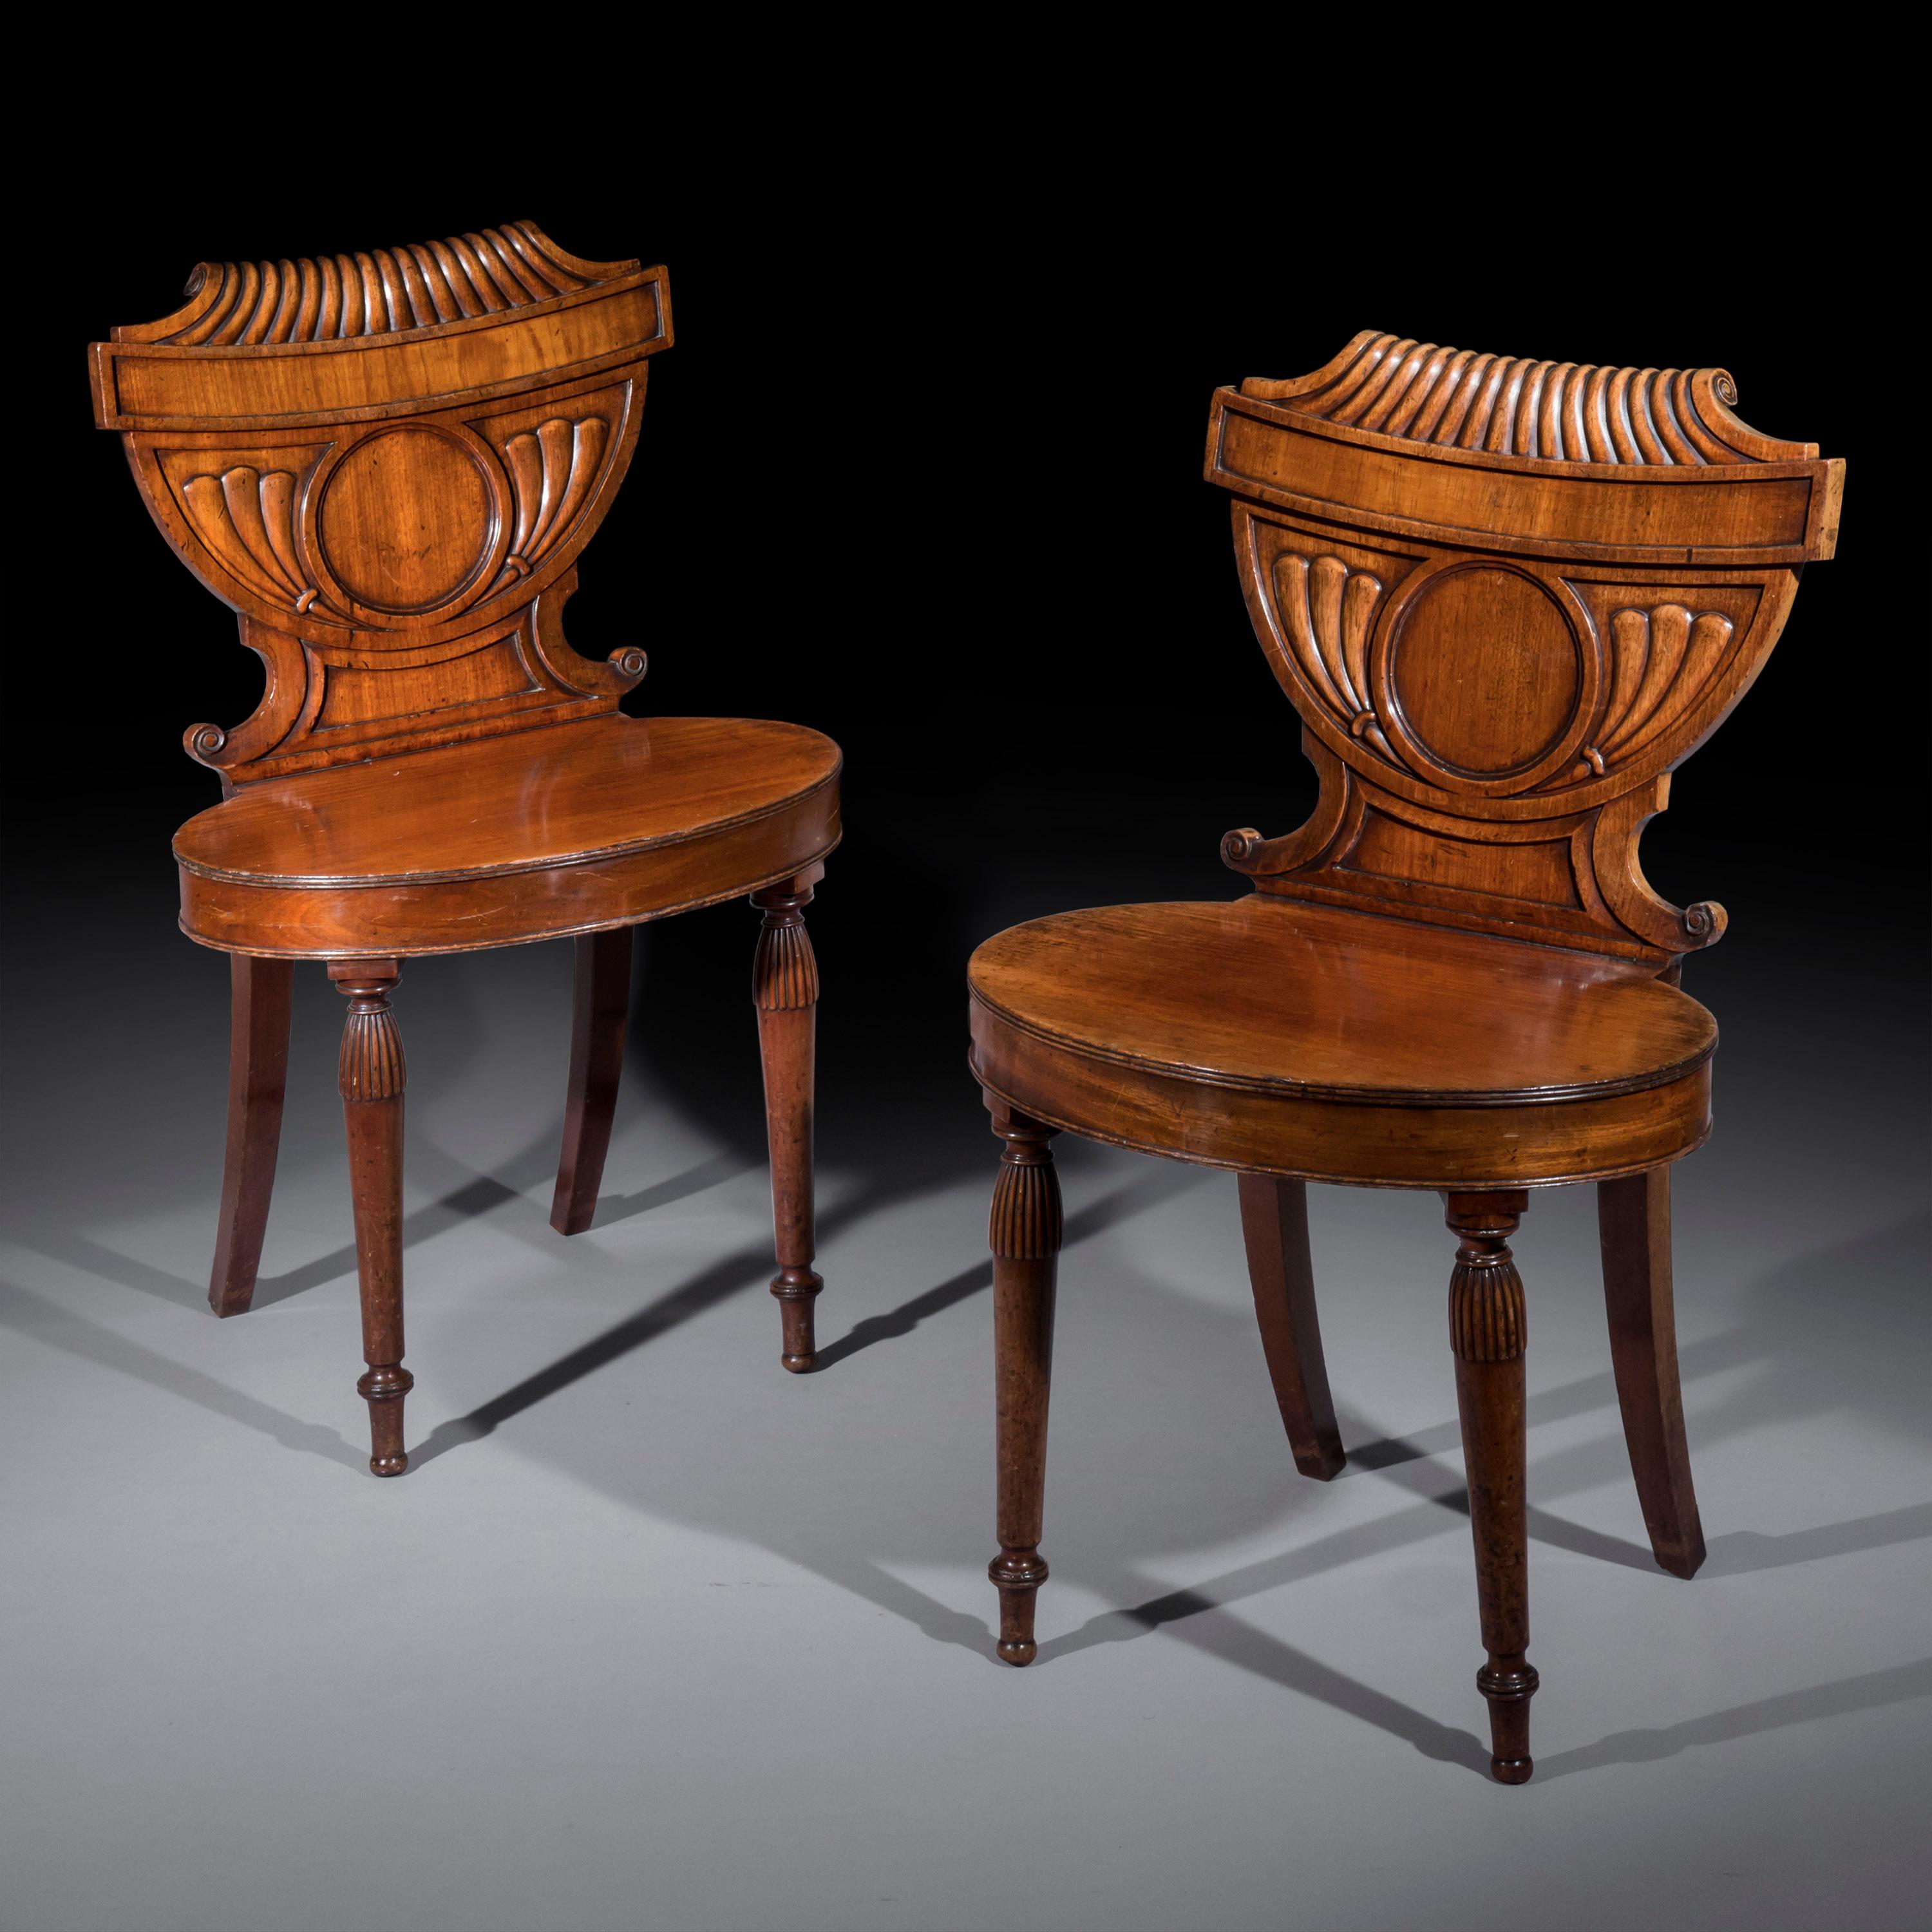 An unusual pair of hall chairs of the late George III - early Regency period, with urn-shaped backs and oval seats
English or Scottish, circa 1800.

Why we like them
These chairs are made to an extremely unusual neoclassical design, possibly for an